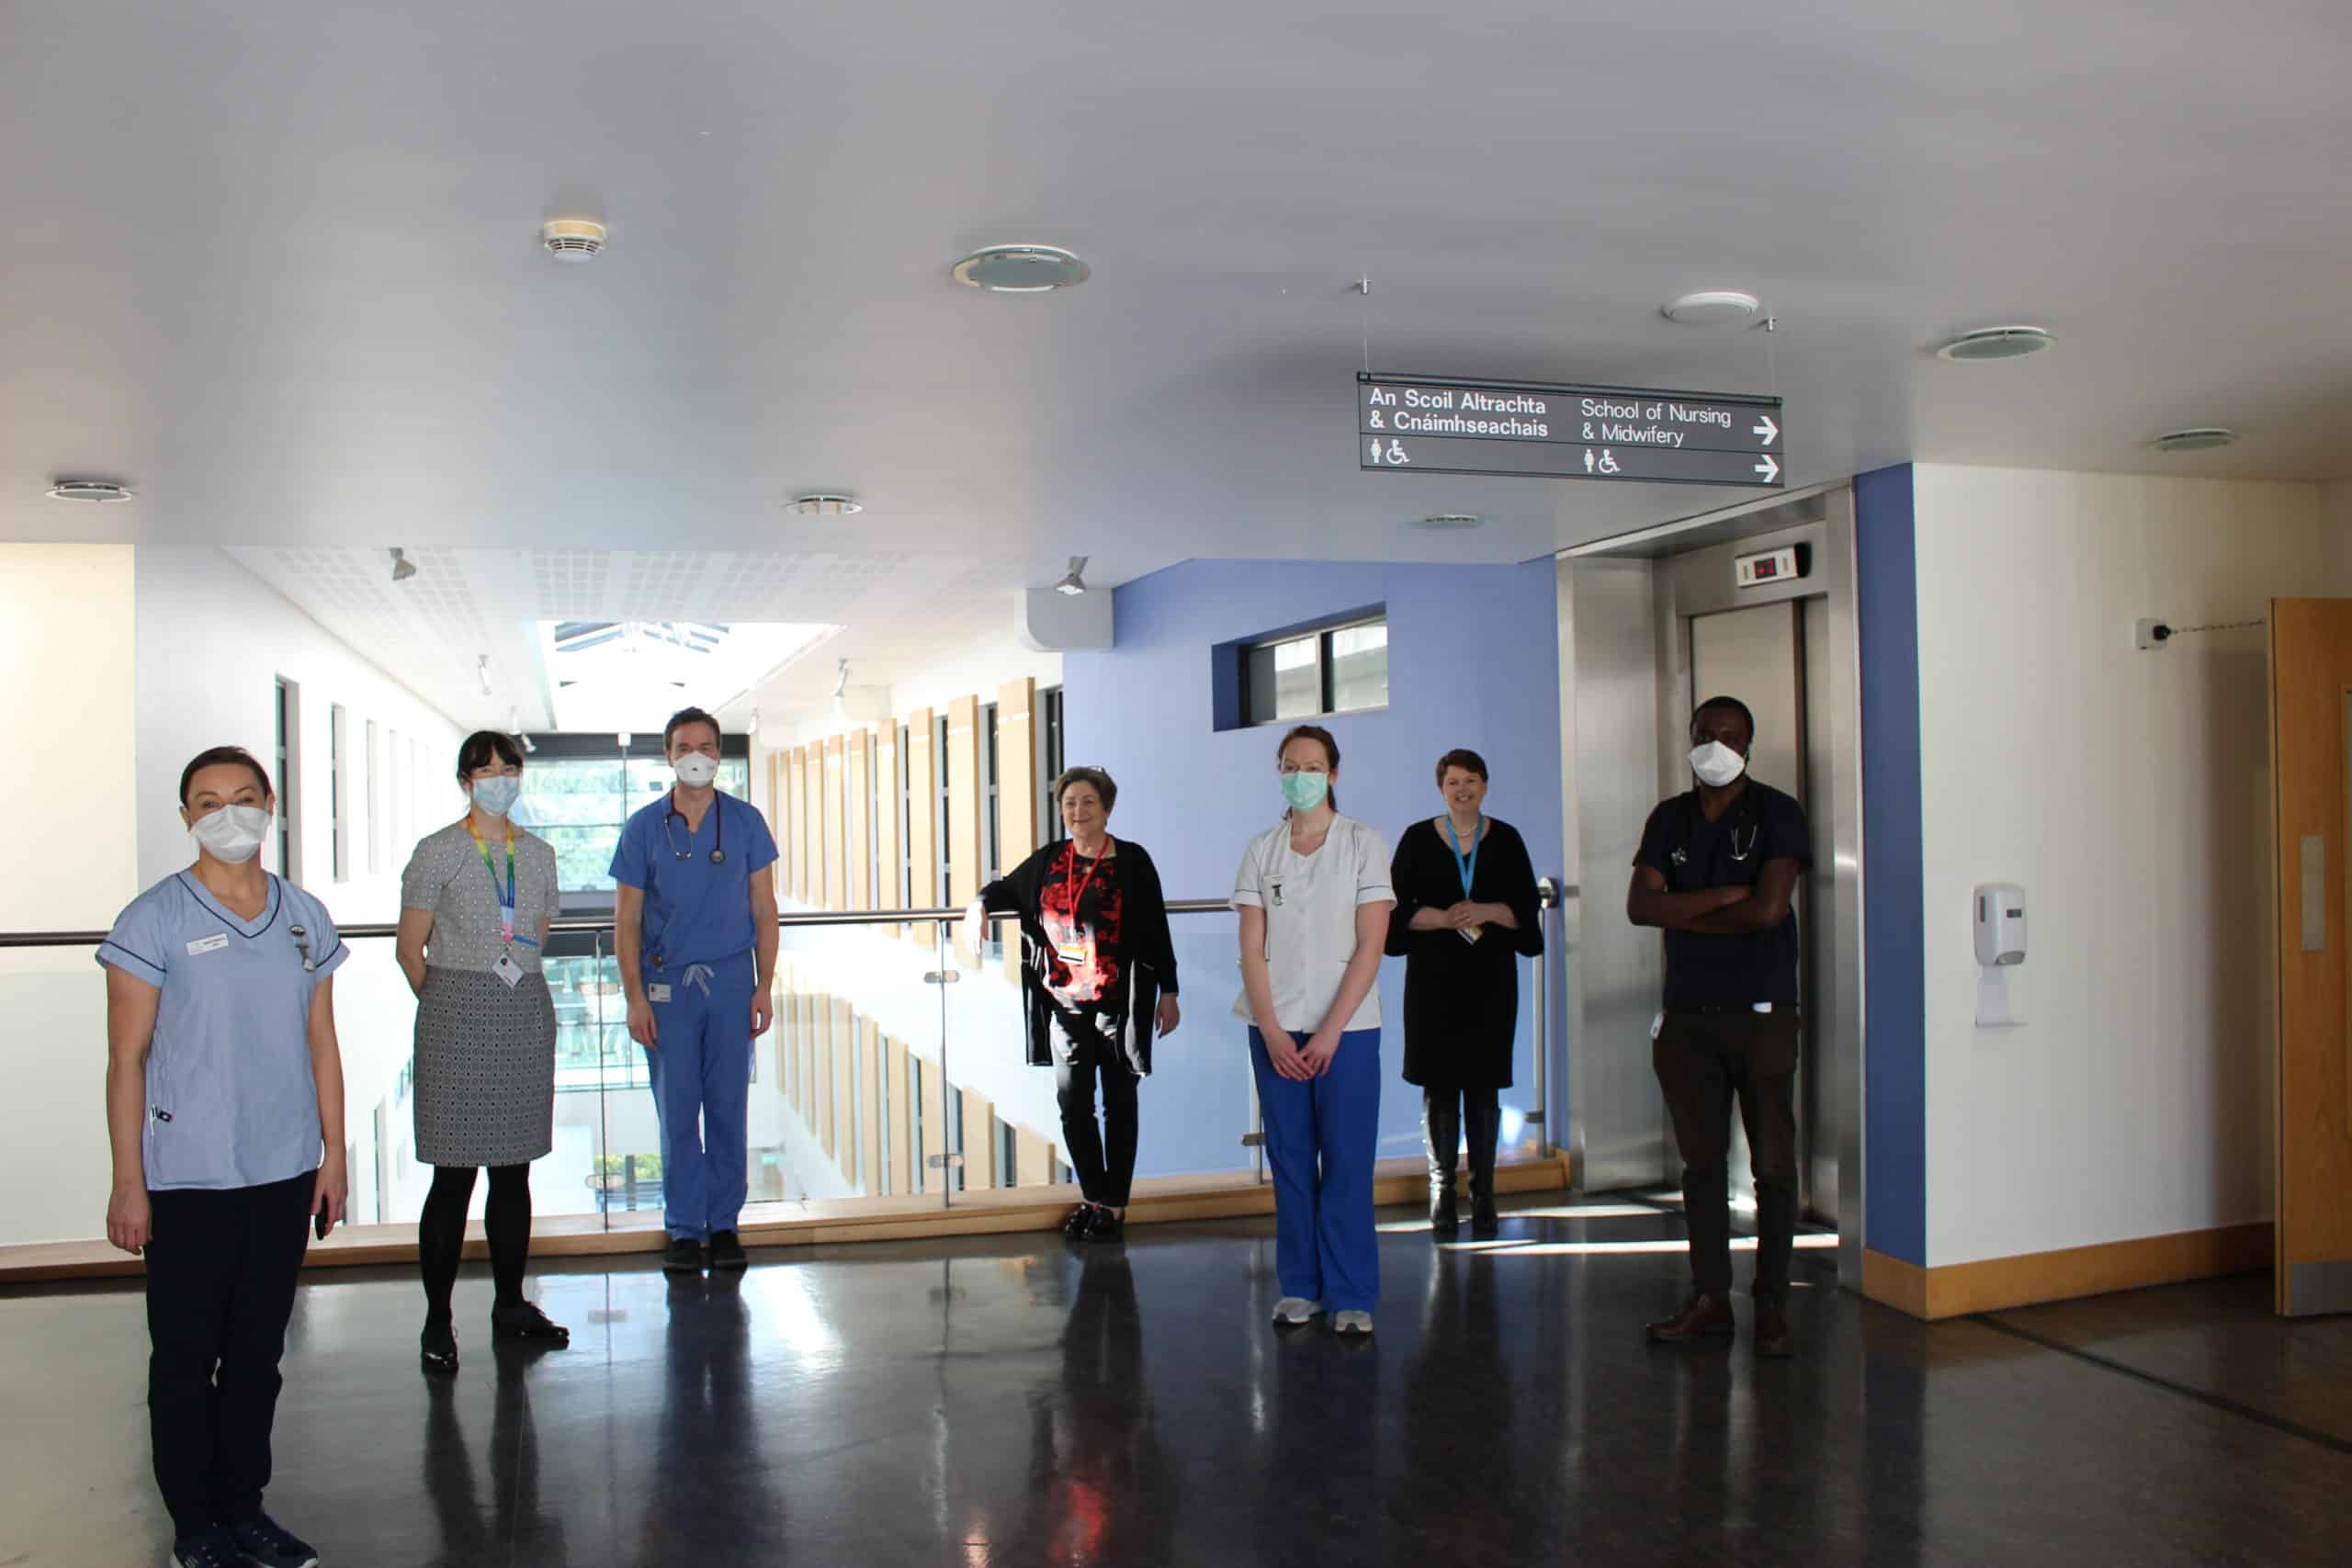 UCC’s School of Nursing transformed into HSE Oncology Day Service during COVID-19 crisis